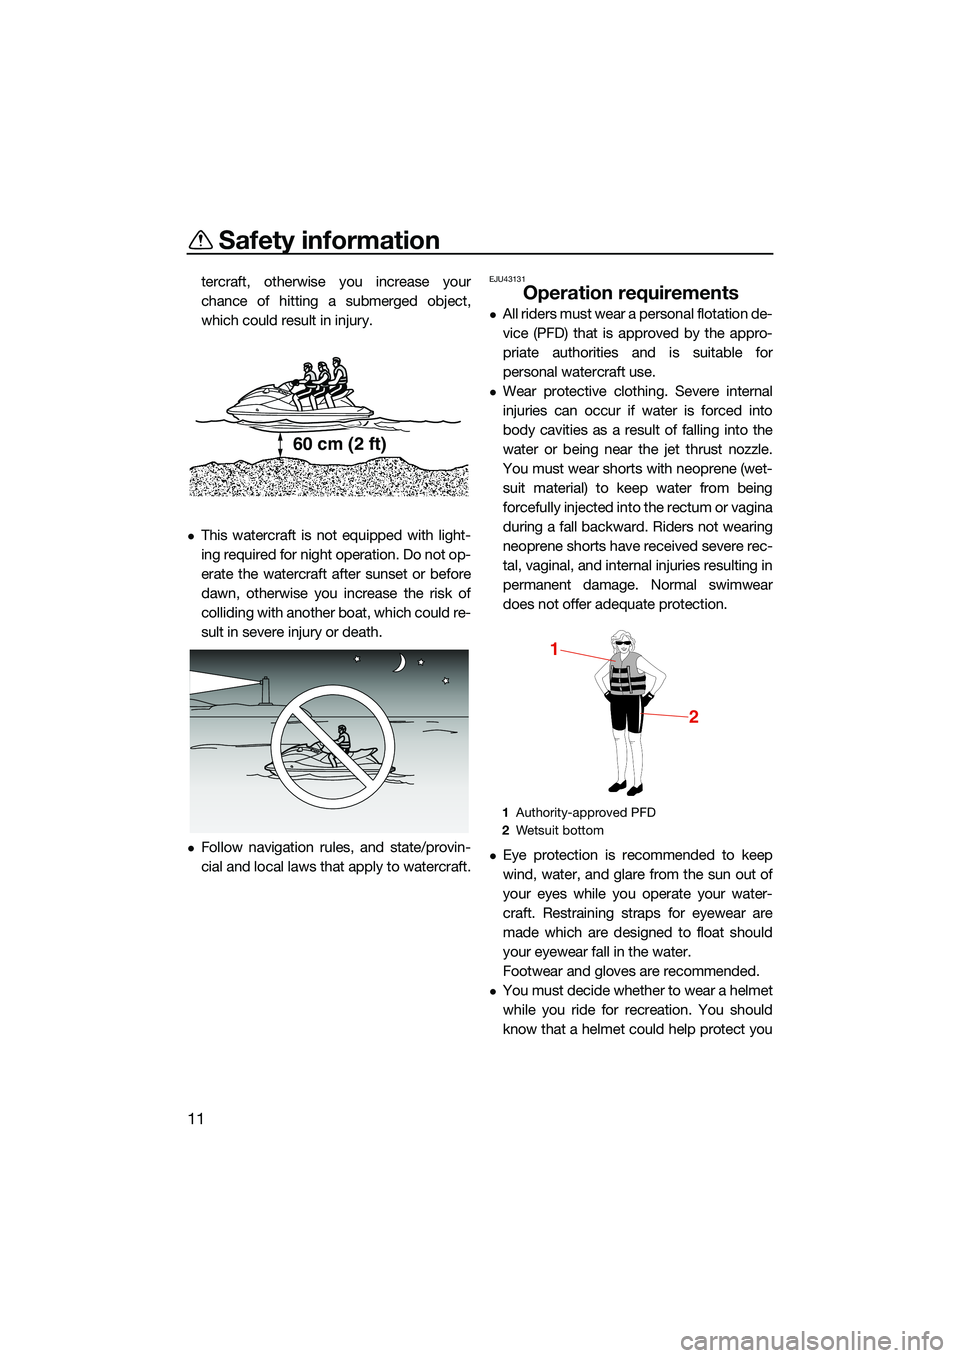 YAMAHA FX HO CRUISER 2022 User Guide Safety information
11
tercraft, otherwise you increase your
chance of hitting a submerged object,
which could result in injury.
This watercraft is not equipped with light-
ing required for night op